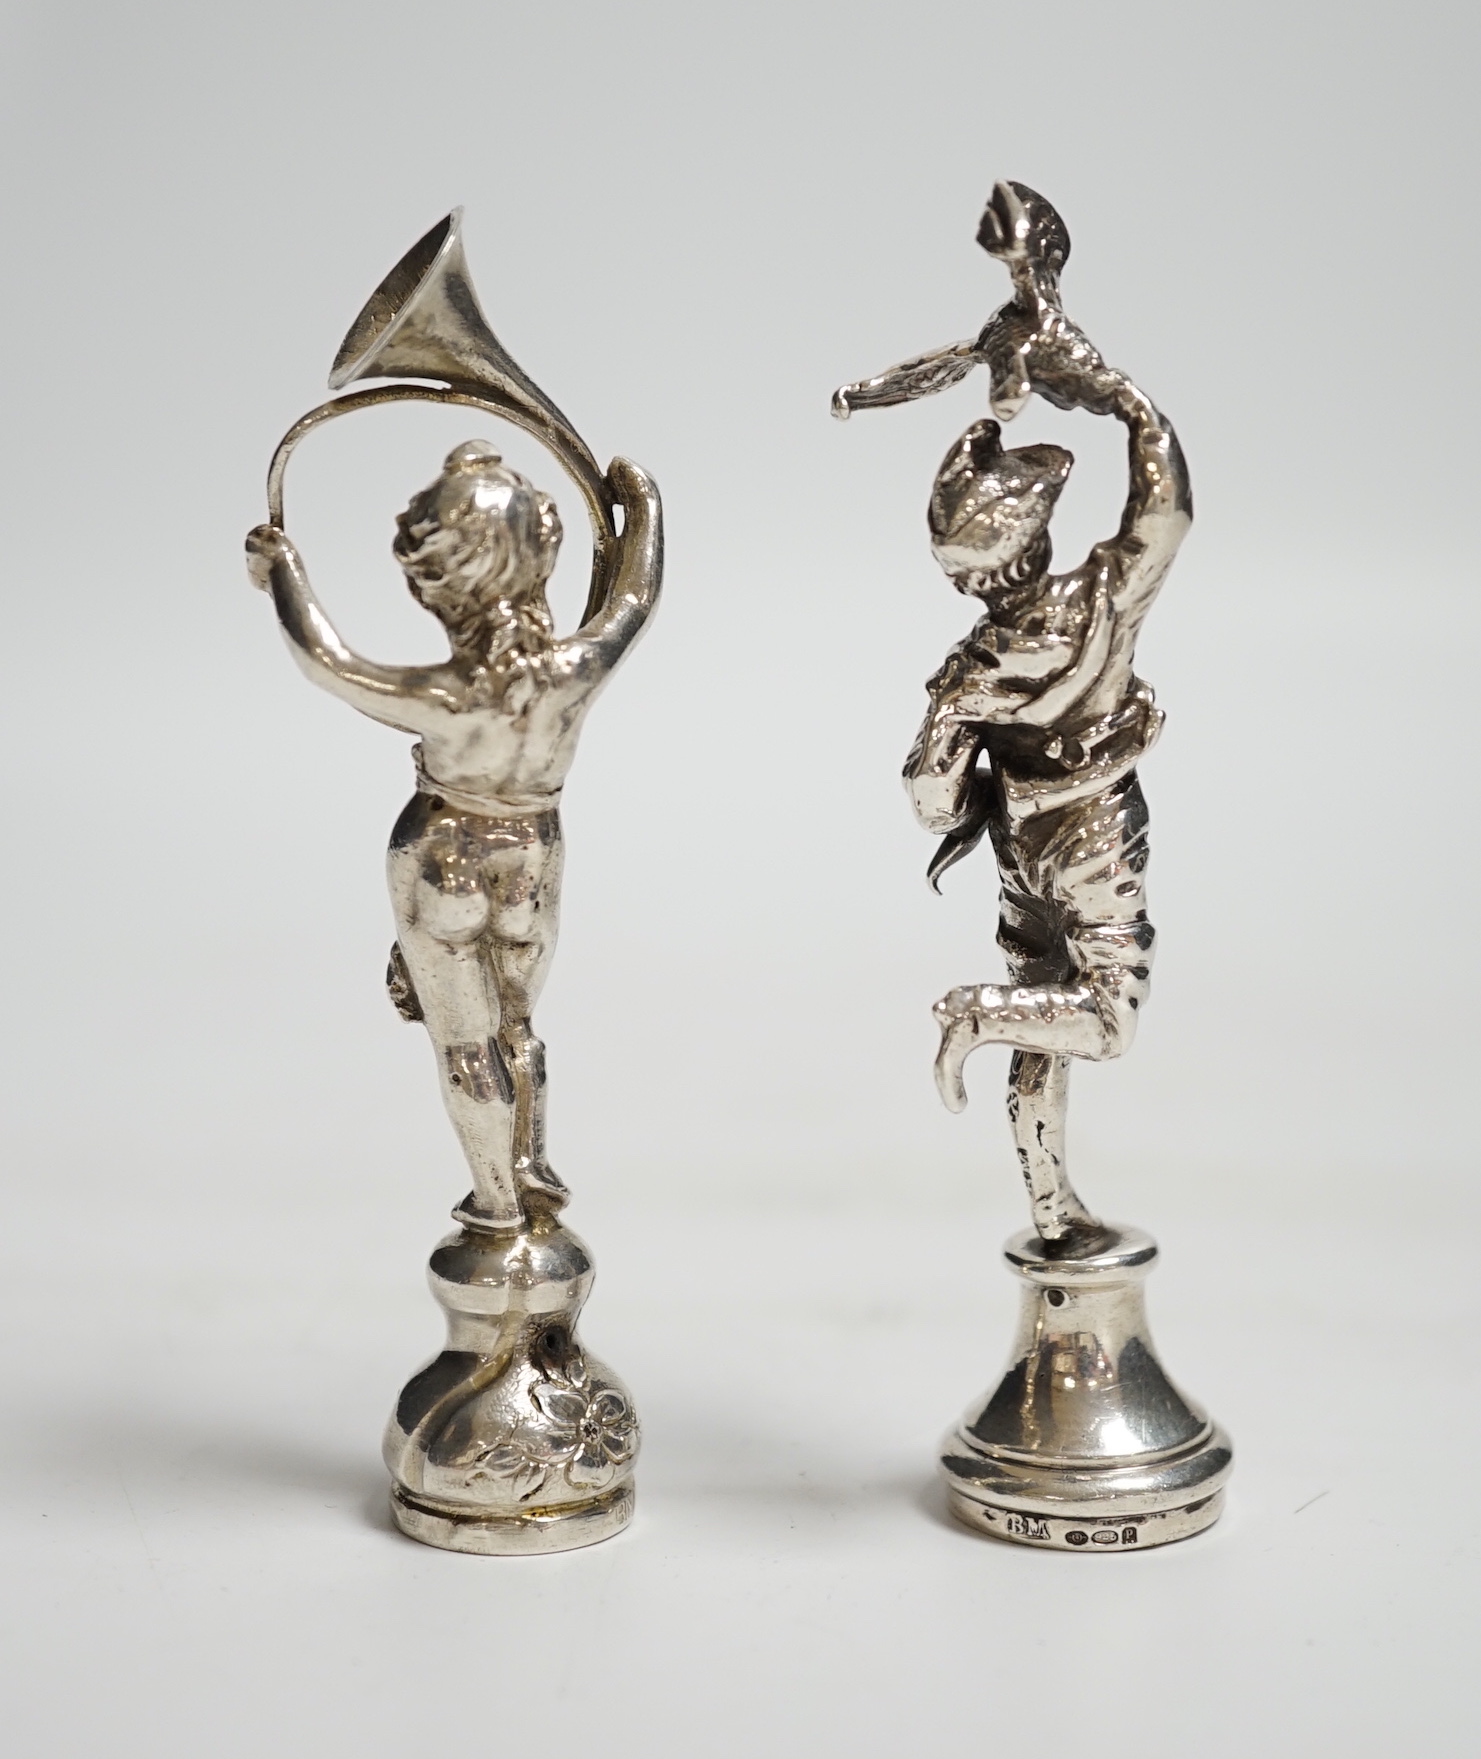 Two silver figural seals, child with French horn, import marks for Berthold Muller, London, 1894, 9cm and gentleman with eagle and crossbow, Berthold Muller, London, 1910.